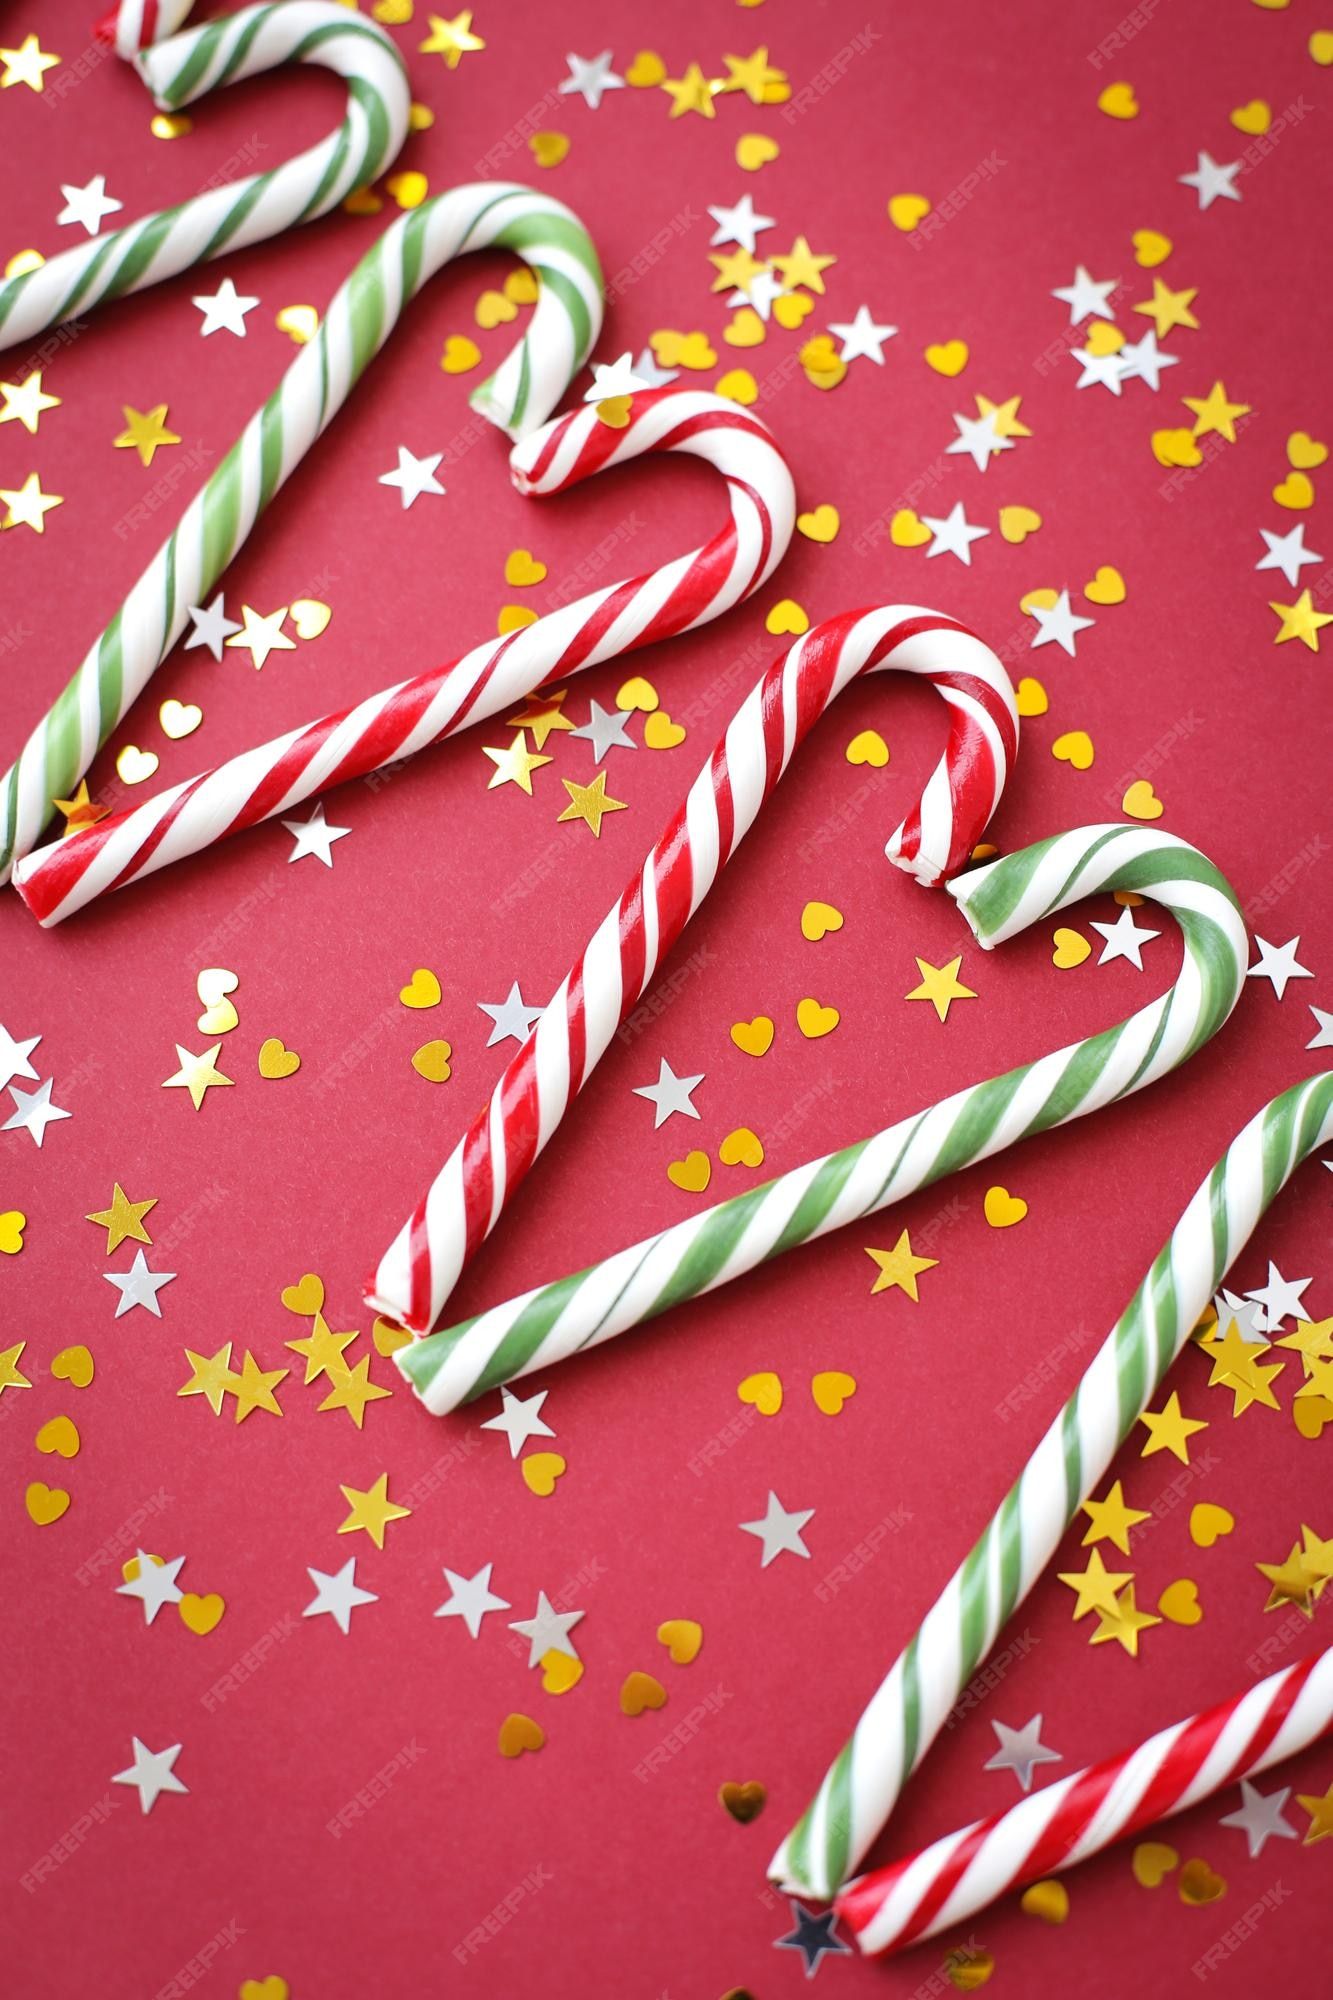 Christmas candy canes on a red background - Candy cane